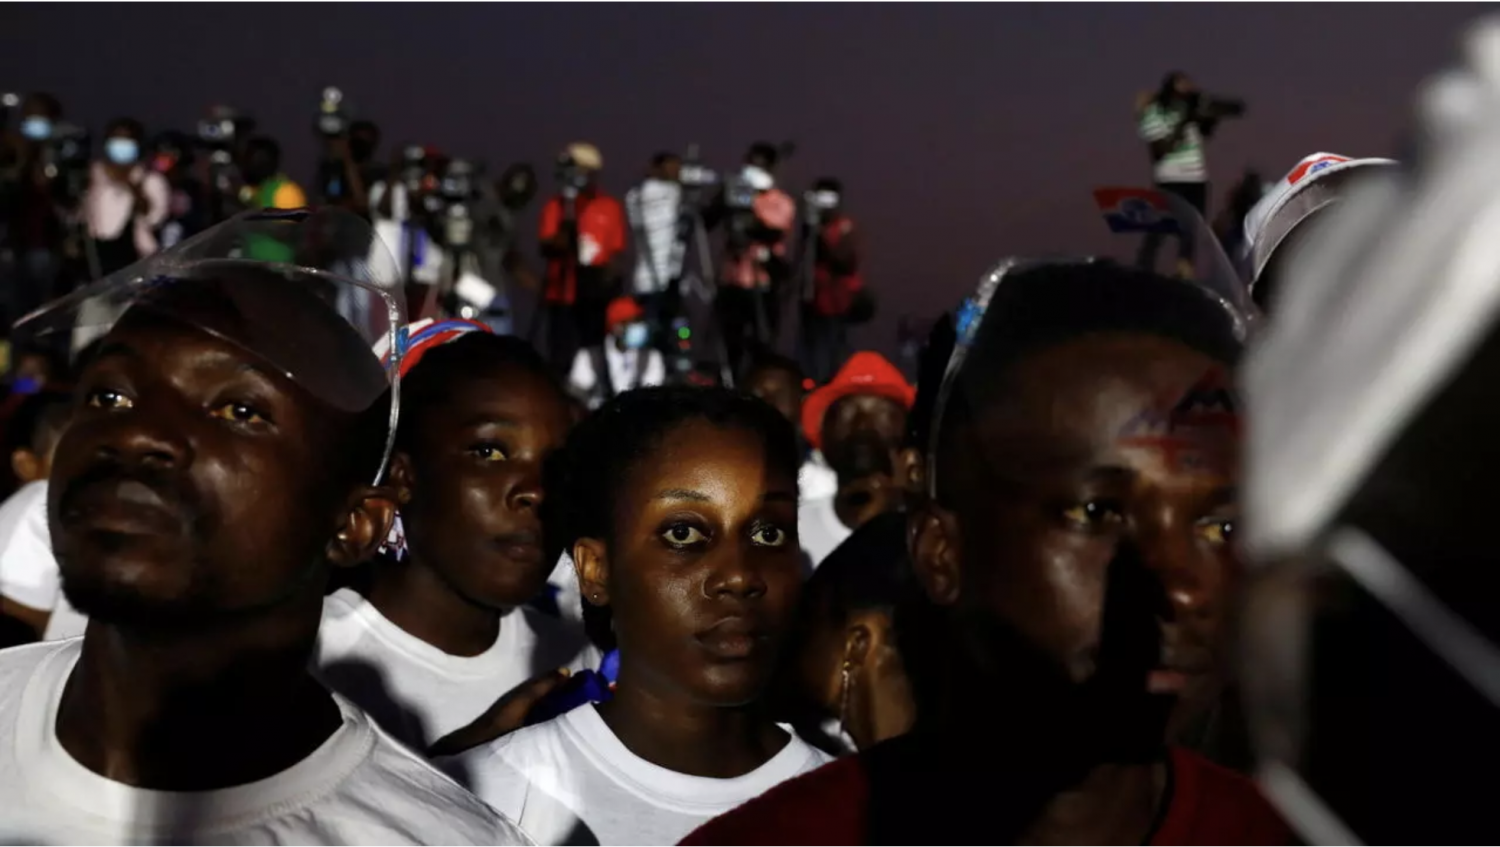 Supporters of Ghana's President Nana Akufo-Addo gather ahead of the country’s presidential and parliamentary elections in Accra on December 5, 2020. © Francis Kokoroko, Reuters